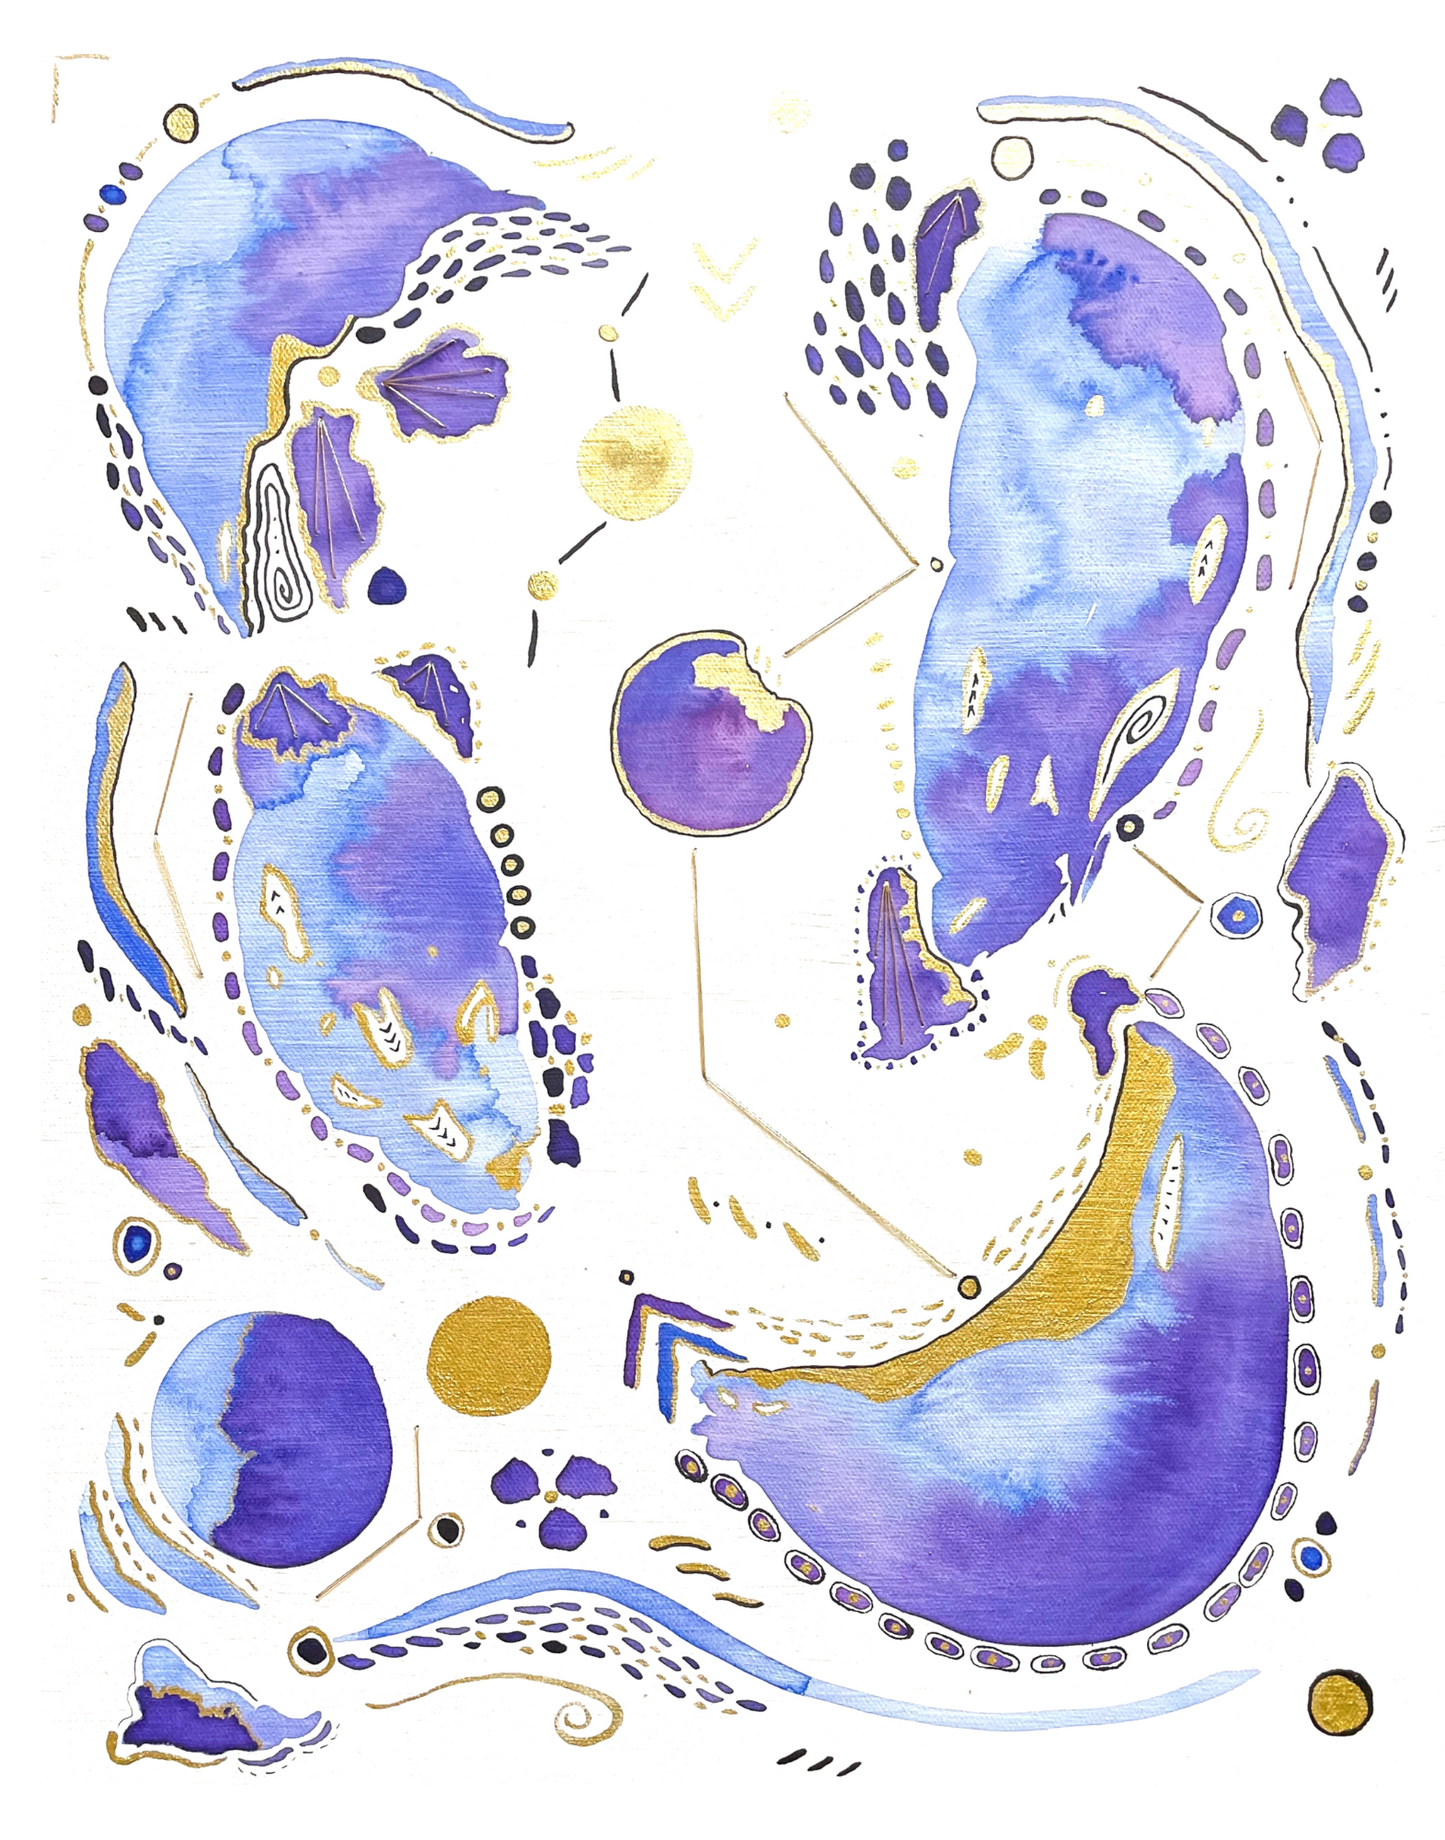 Cosmic Ocean Abstract Embellished Art Print - Signed By the Artist